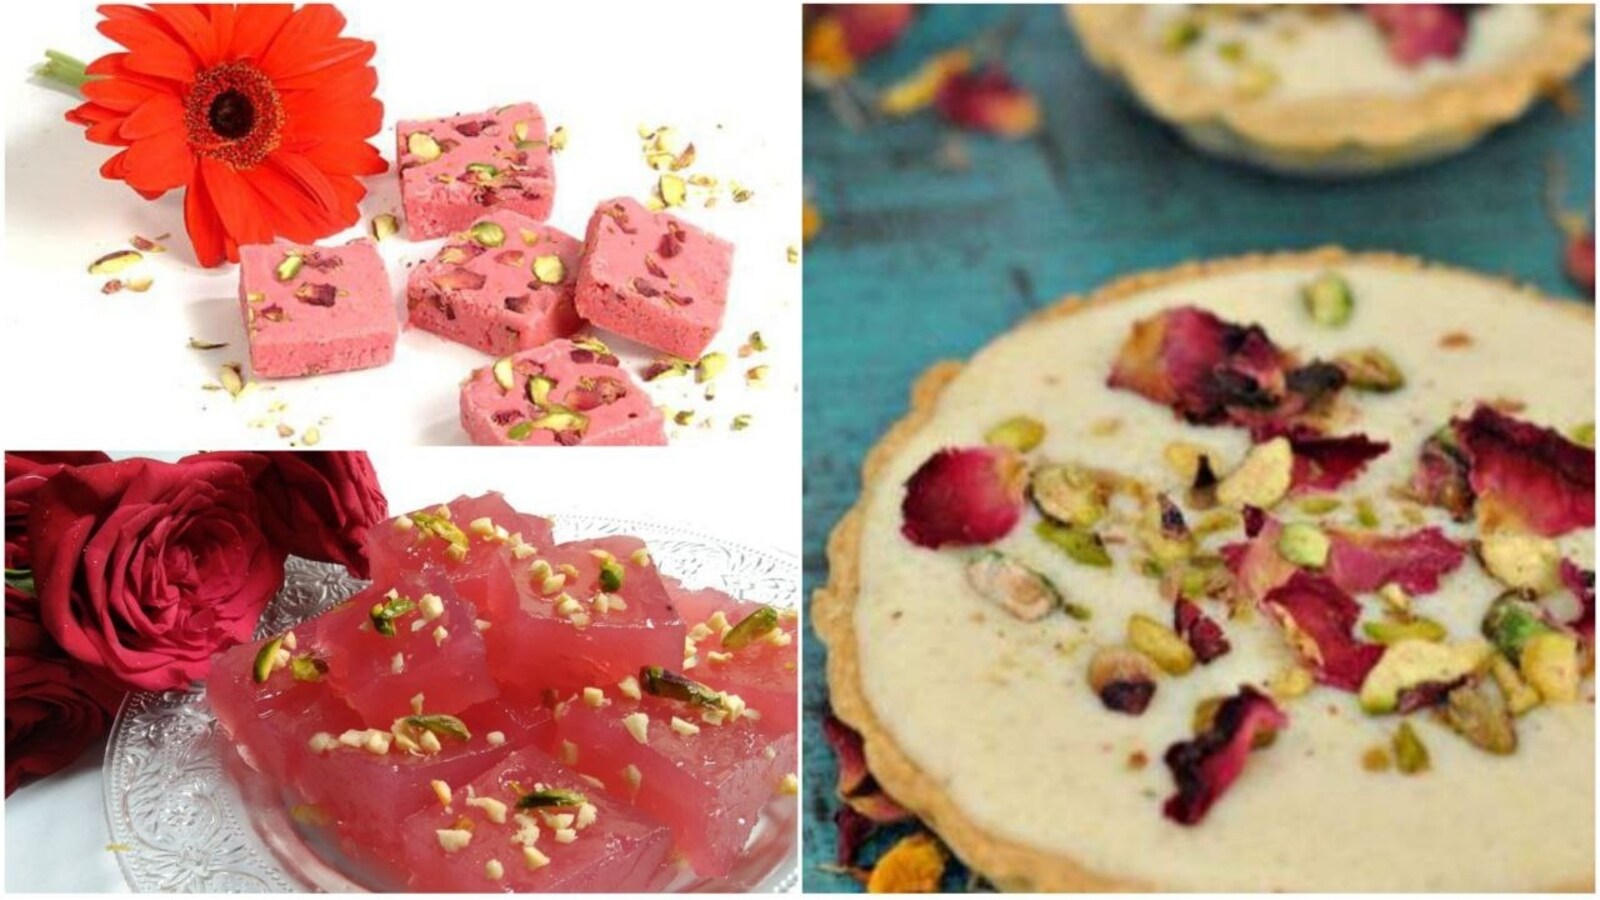 Rose Day 2023: Celebrate love with these delicious rose-infused recipes